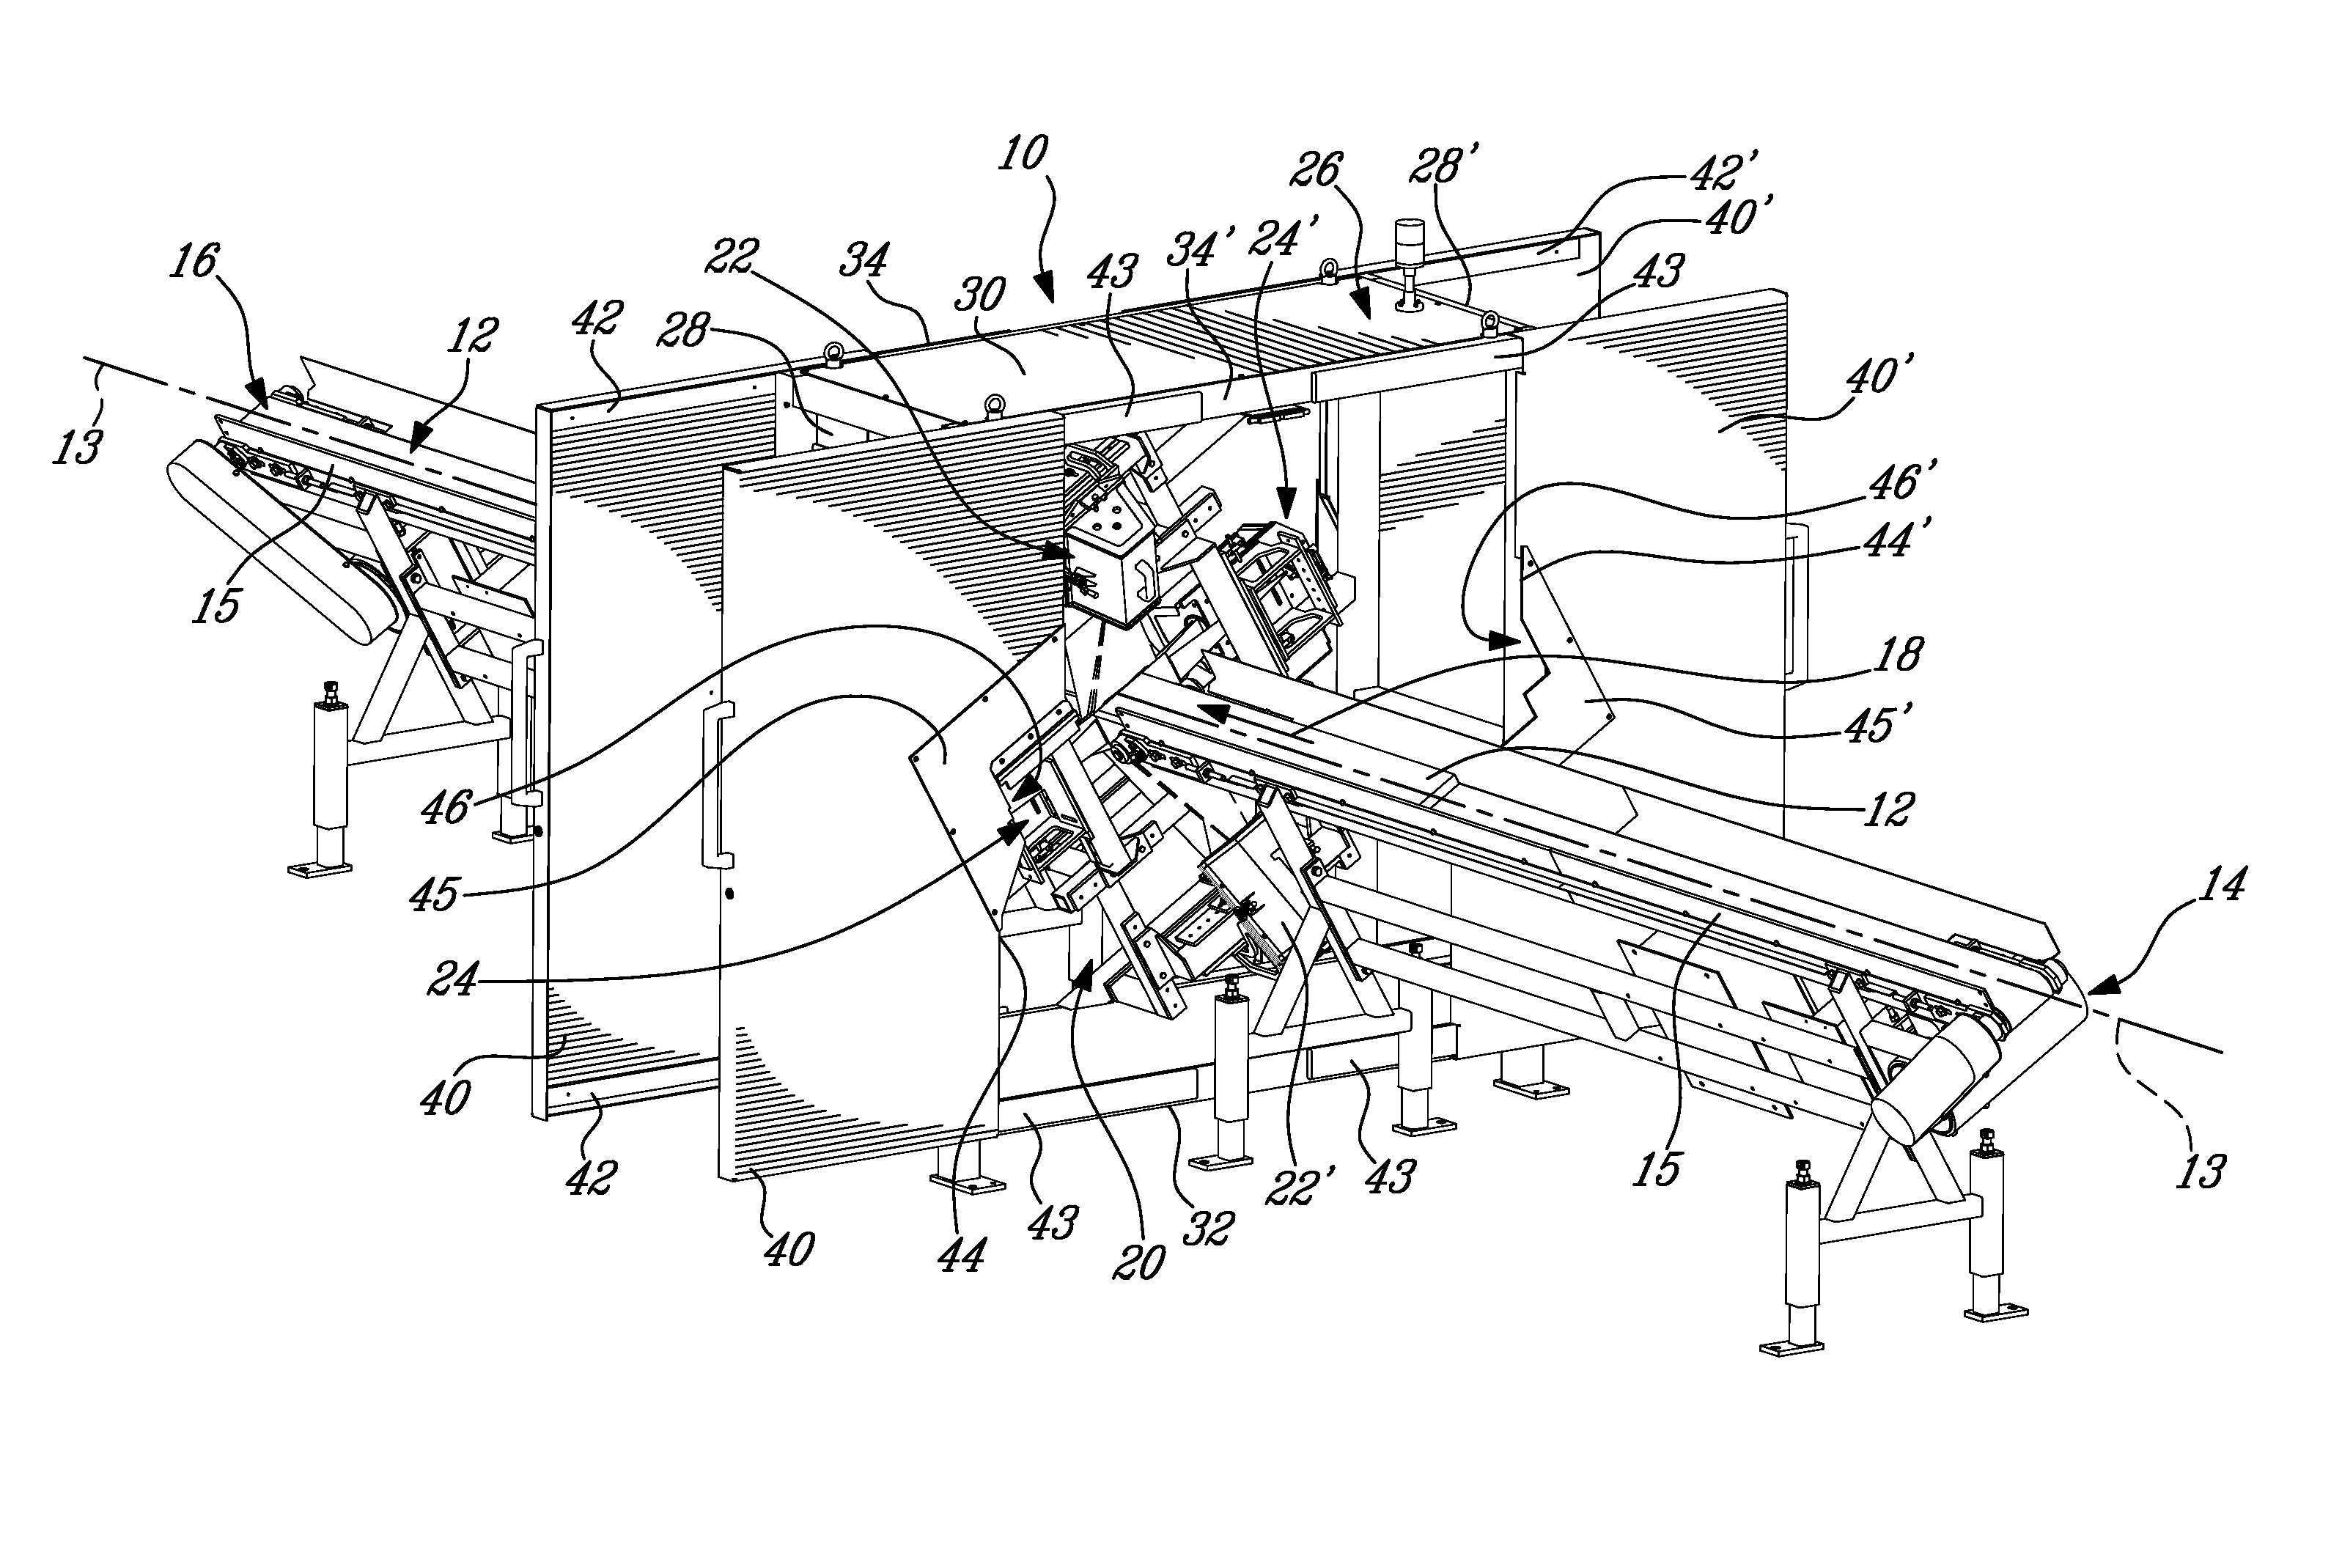 Optical inspection apparatus and method